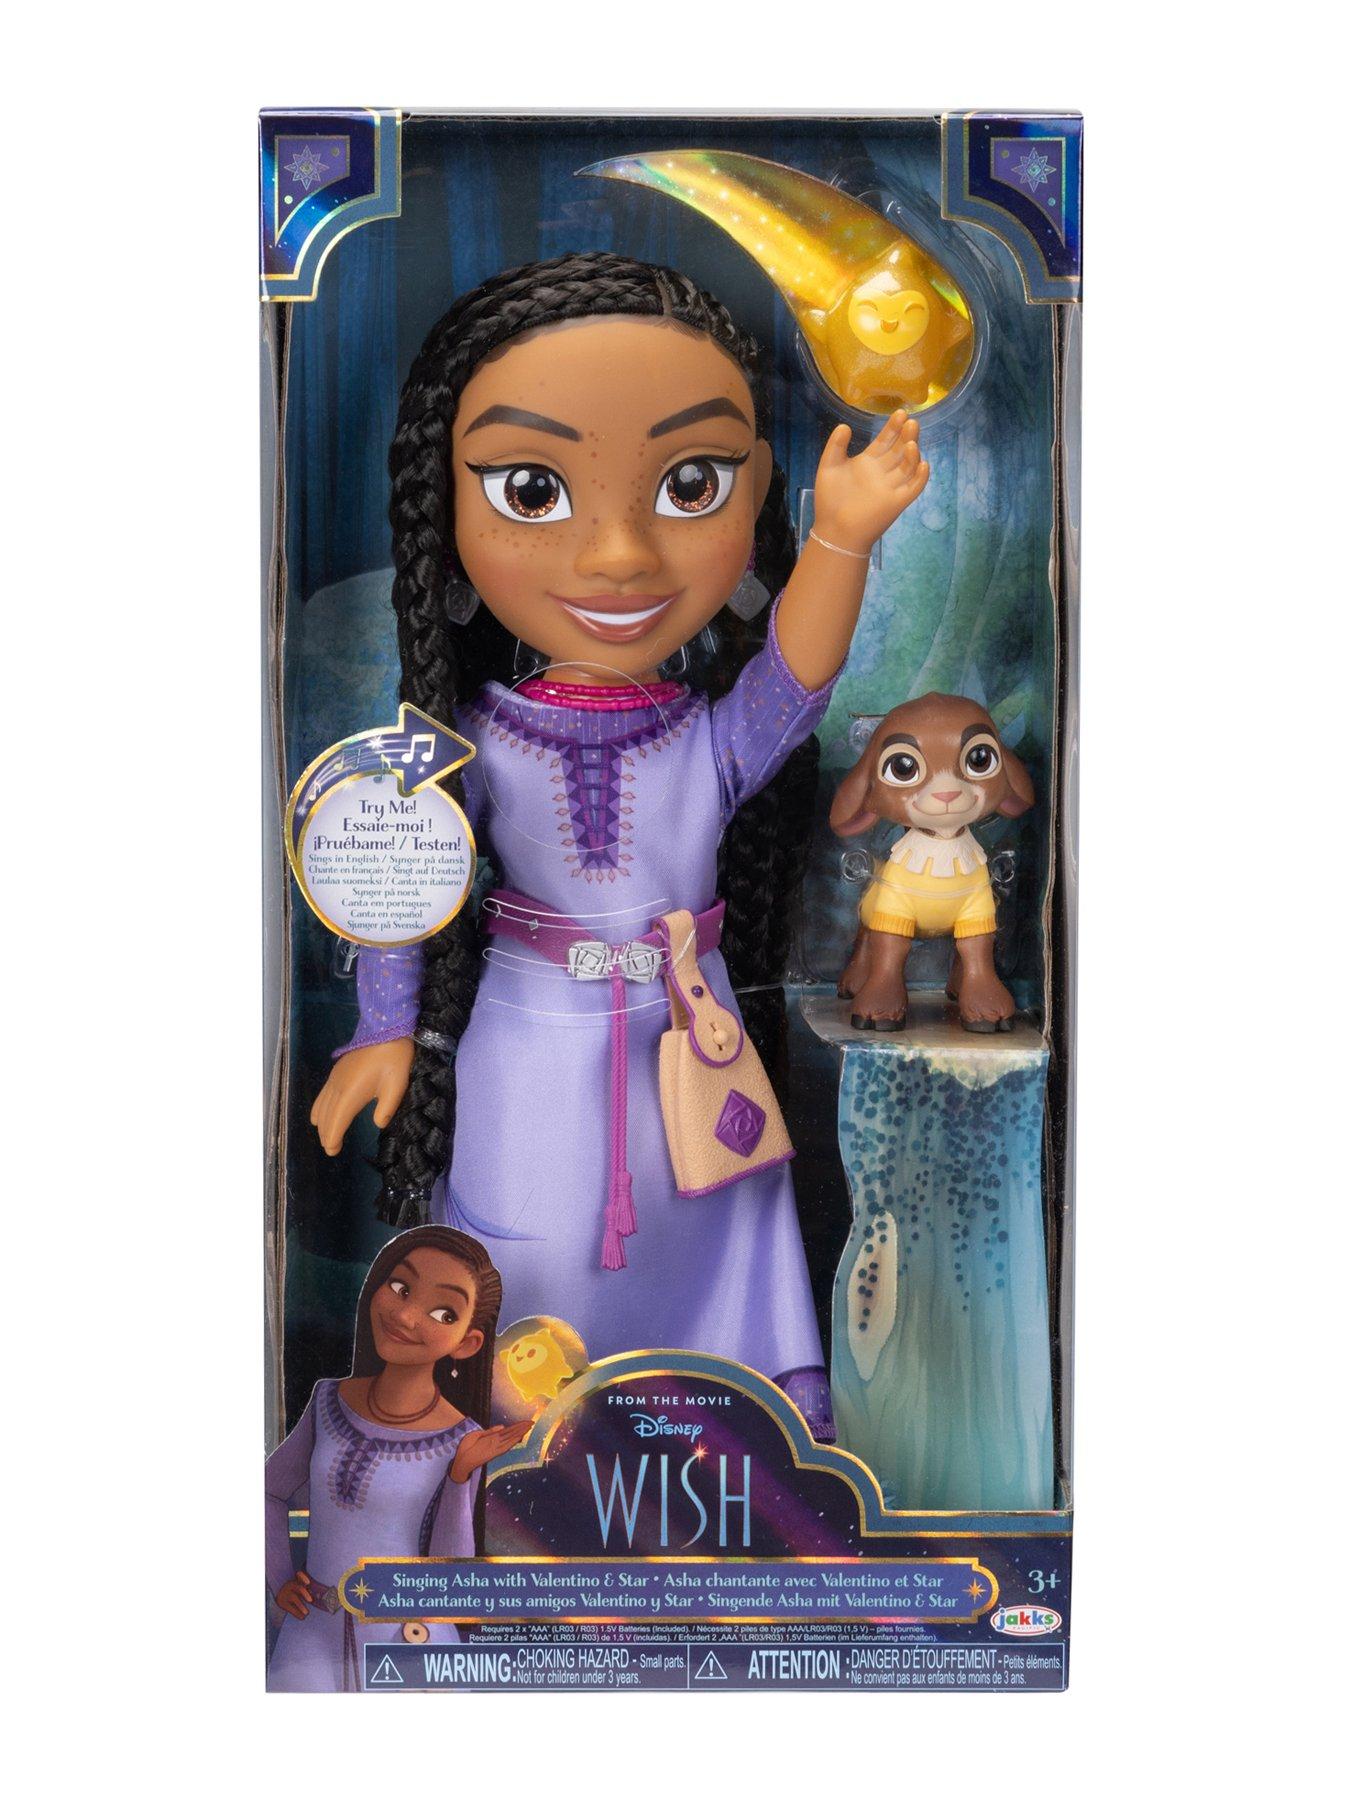 Disney Animation Promos on X: New look at Asha and Star from